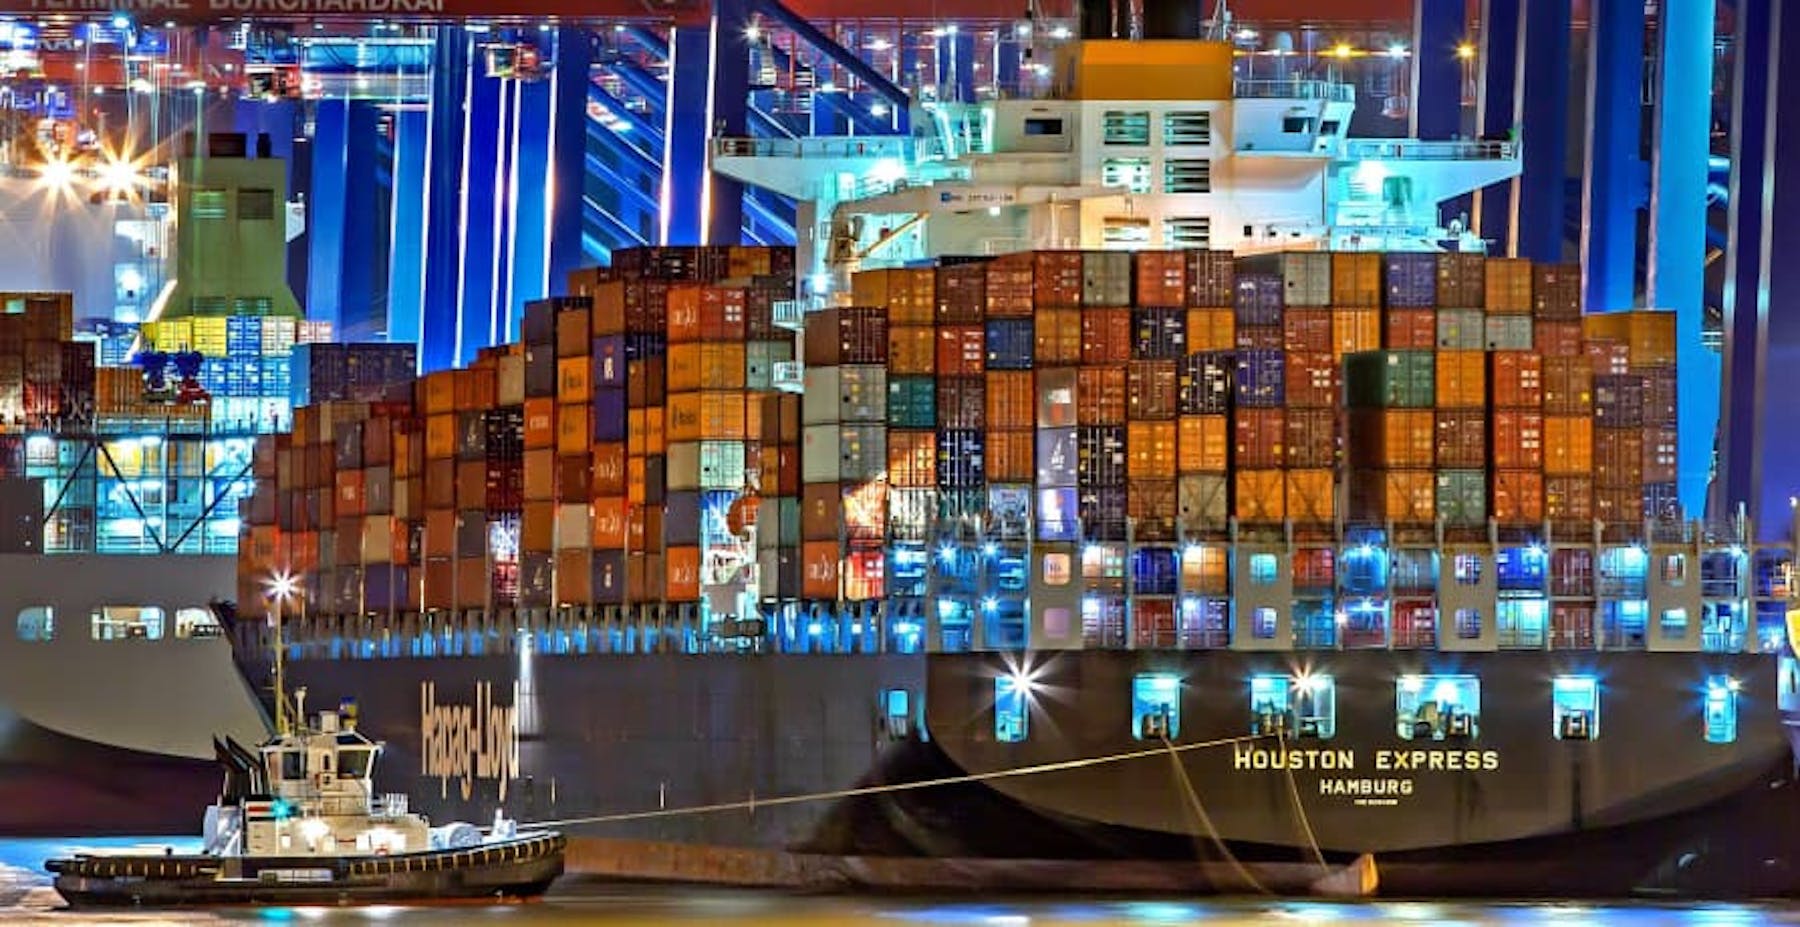 large ship with lots of shipping containers